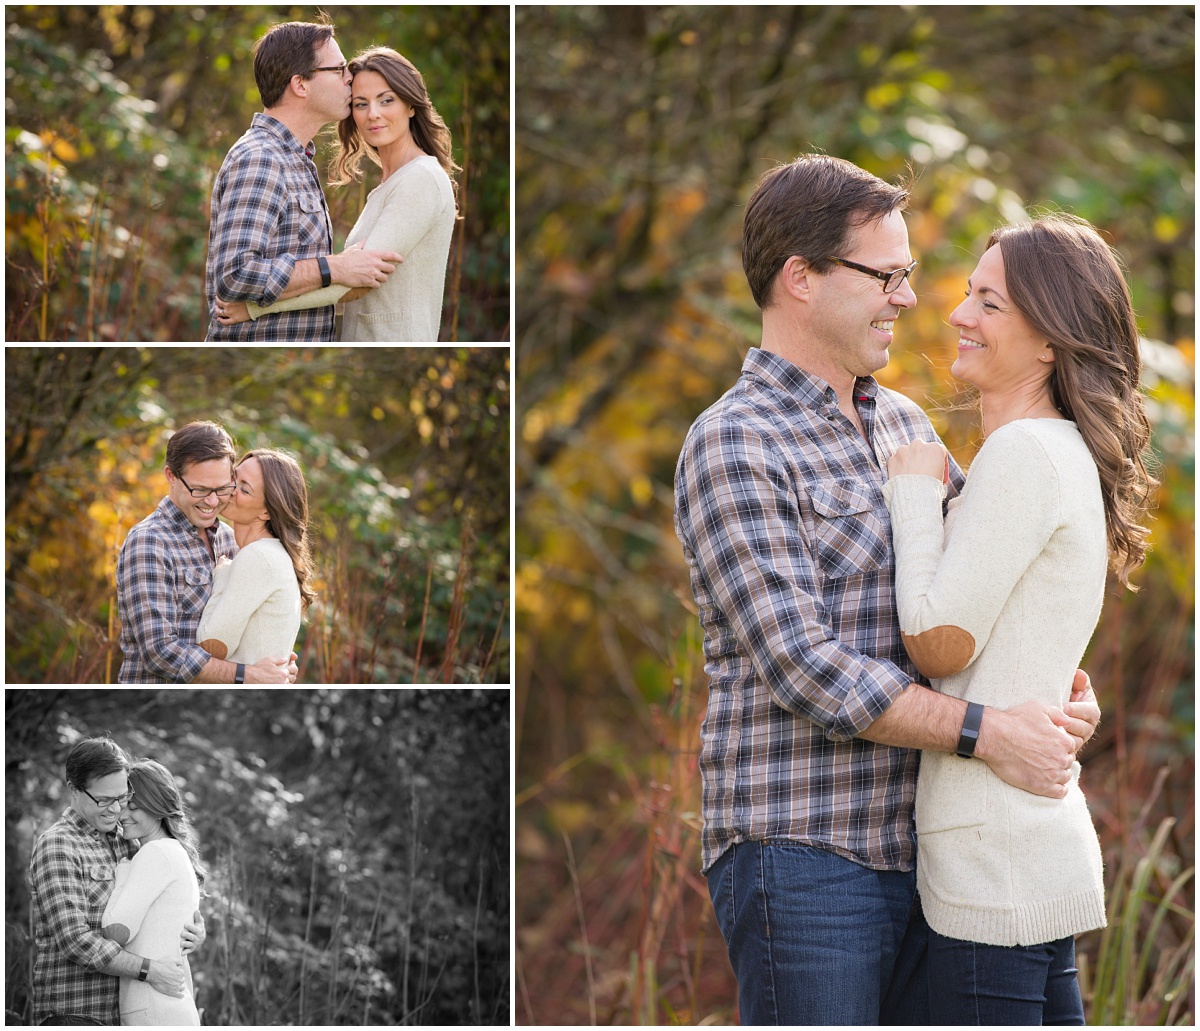 Amazing Day Photography - Mission Engagement Session - Hatzic Lake - Cascade Falls -Blueberry Field - Fall Engagement Session - Fraser Valley Engagement Photographer (8).jpg